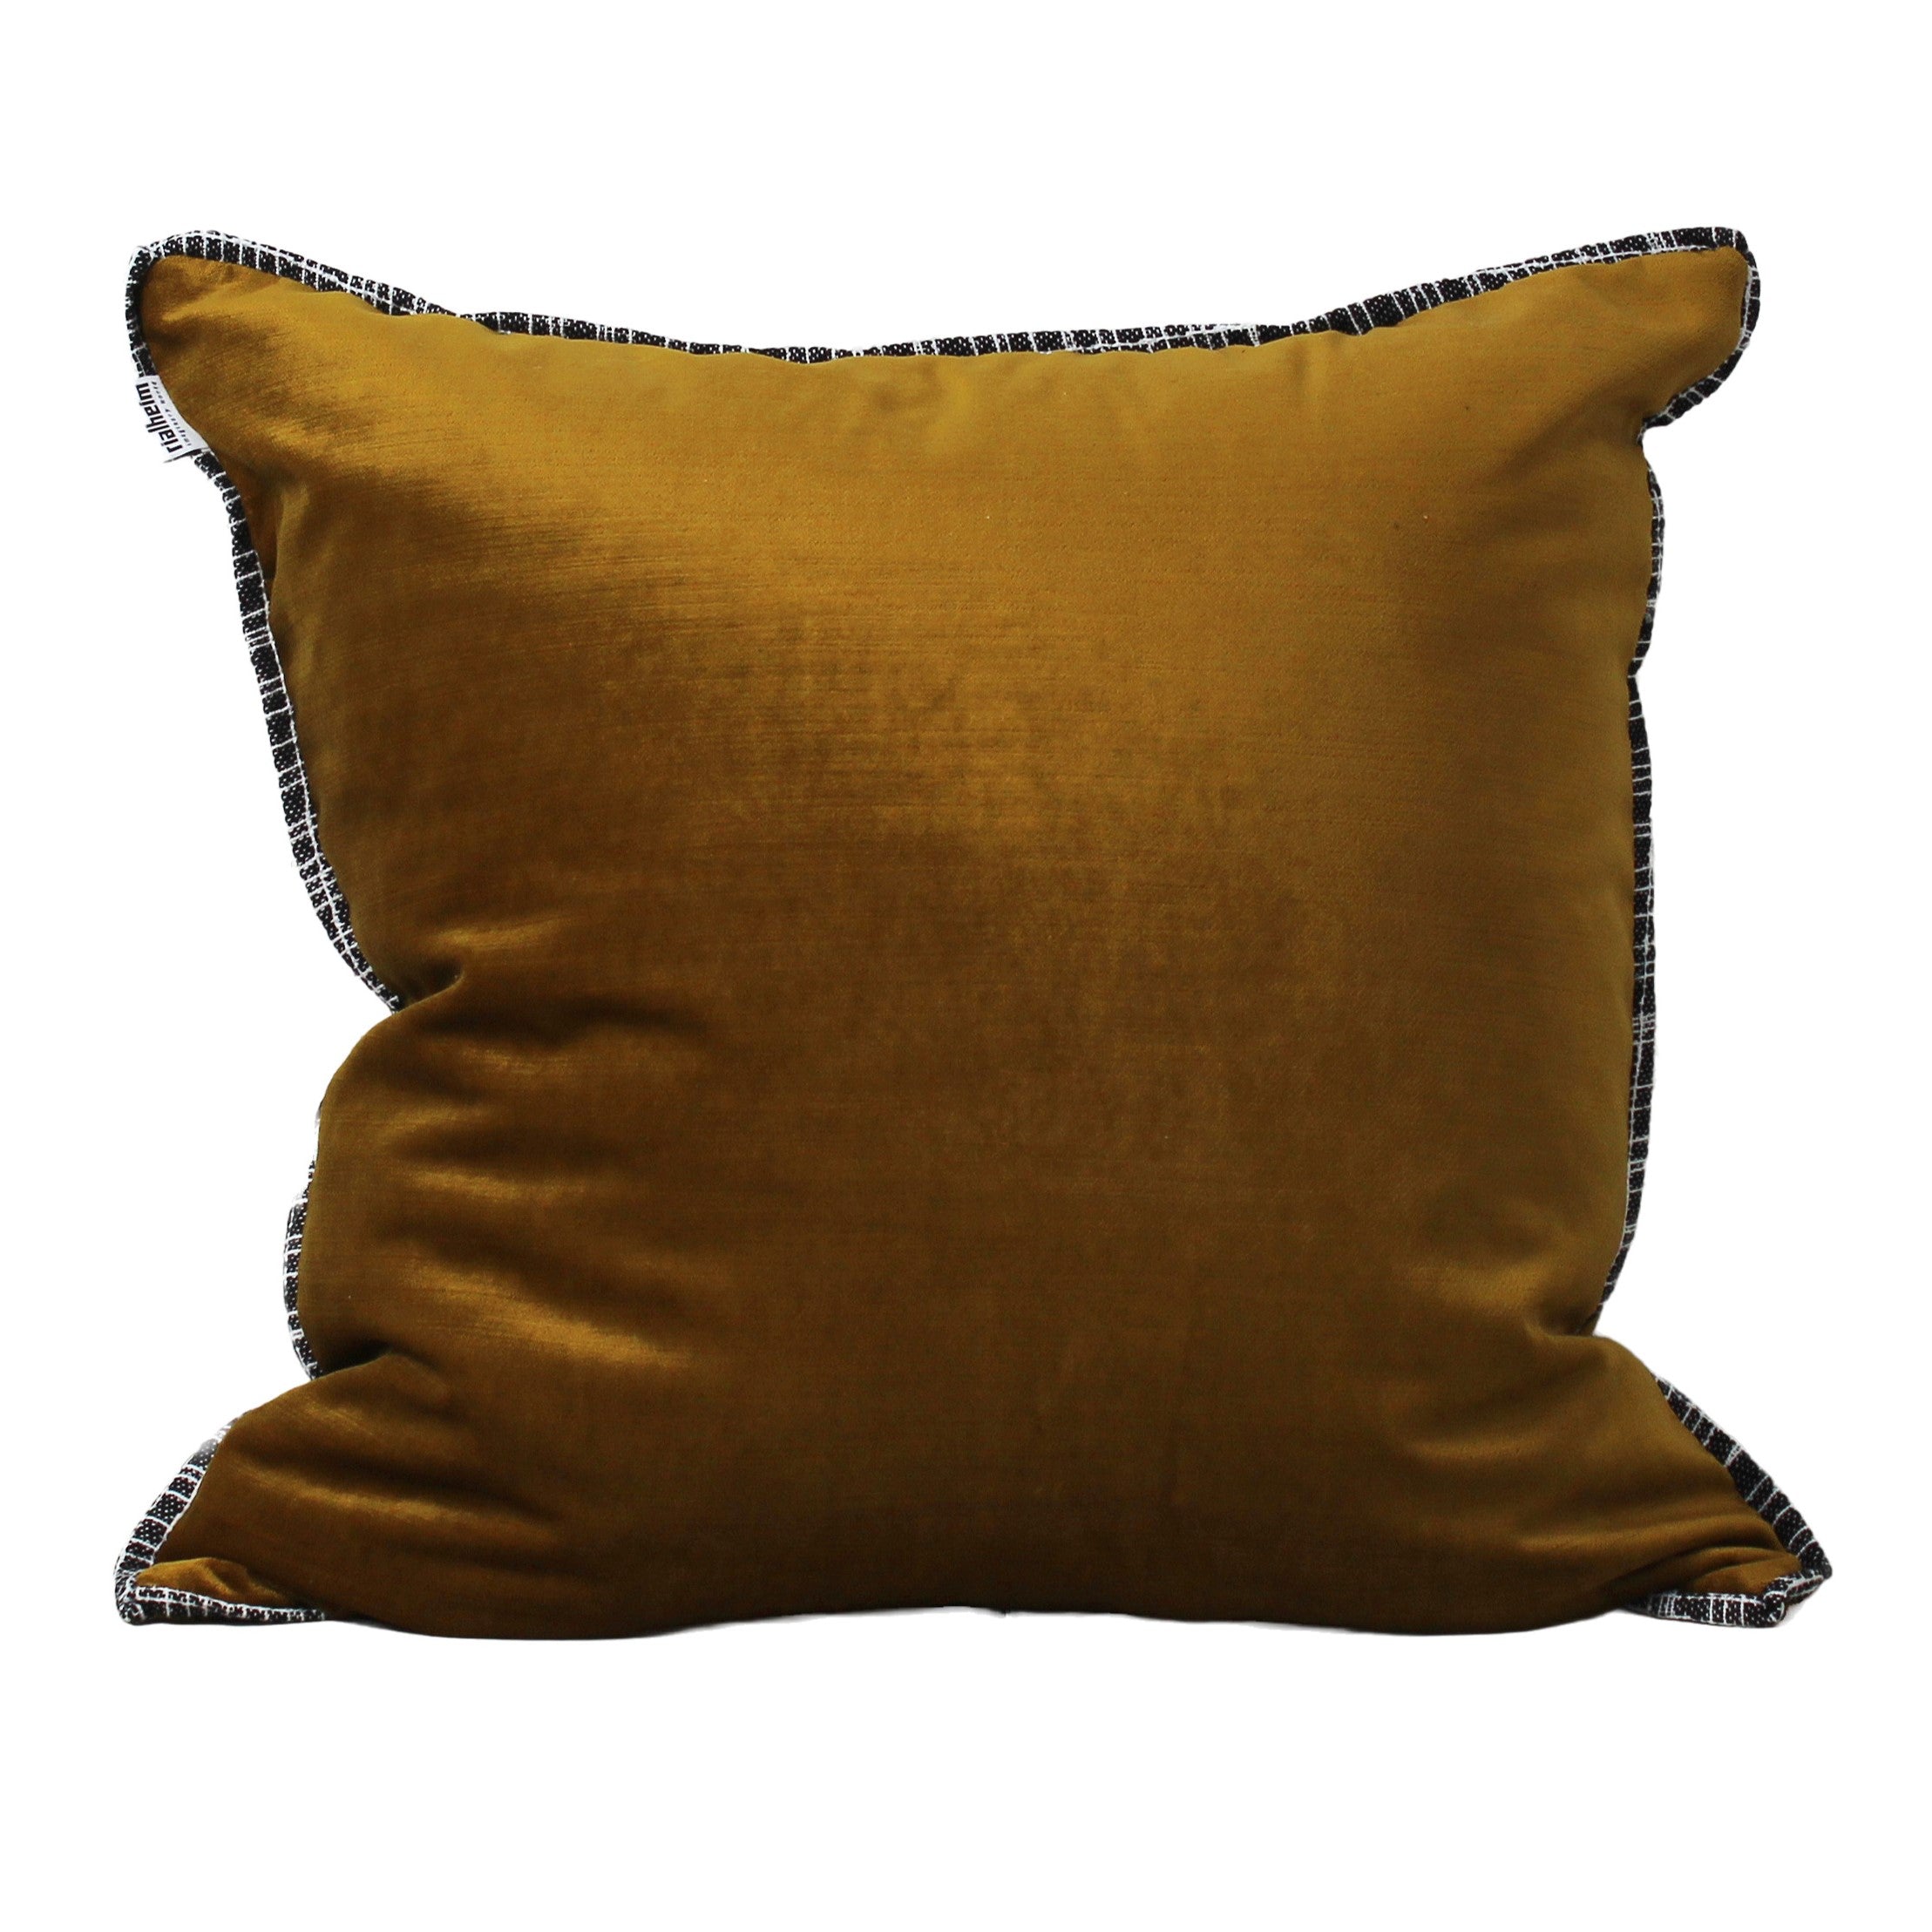 Golden scatter cushion with scratch woven trim, 60x60cm, from Rialheim's Scratch Scatter Cushion Collection. Handcrafted in South Africa with high-quality materials and sustainable production methods. A stylish and versatile addition to any home decor.